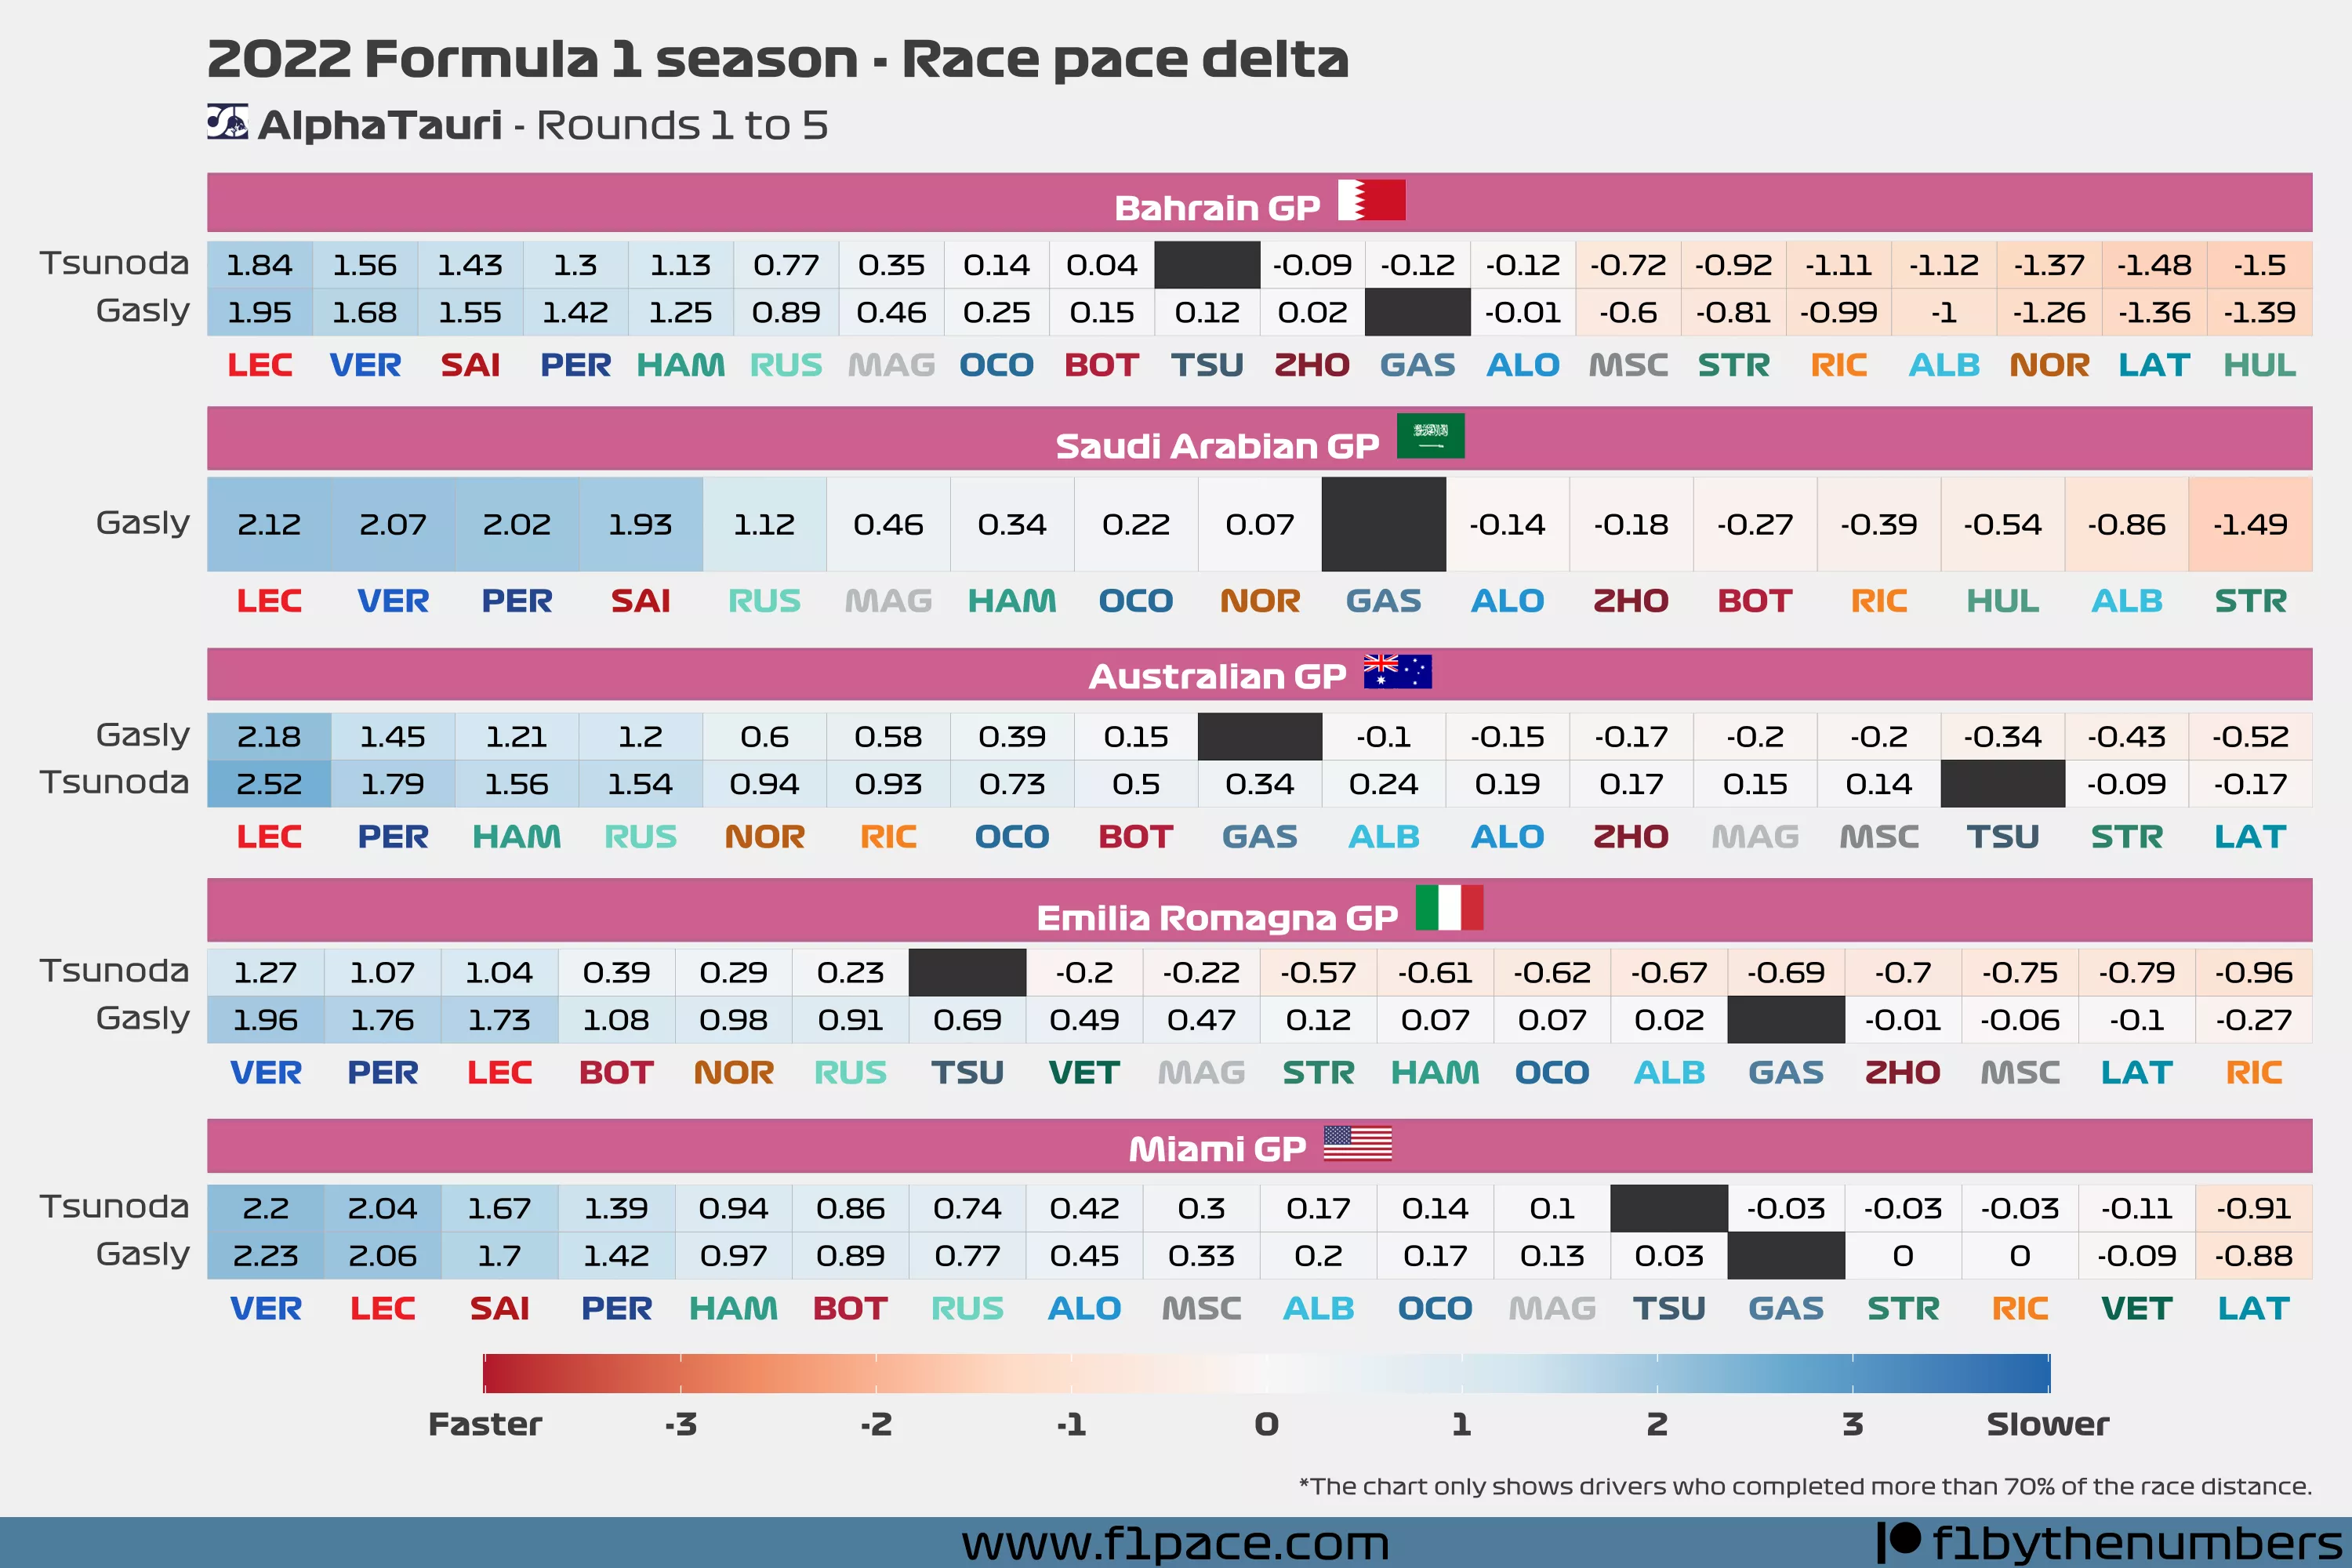 Race pace delta: Rounds to 1 to 5 - AlphaTauri